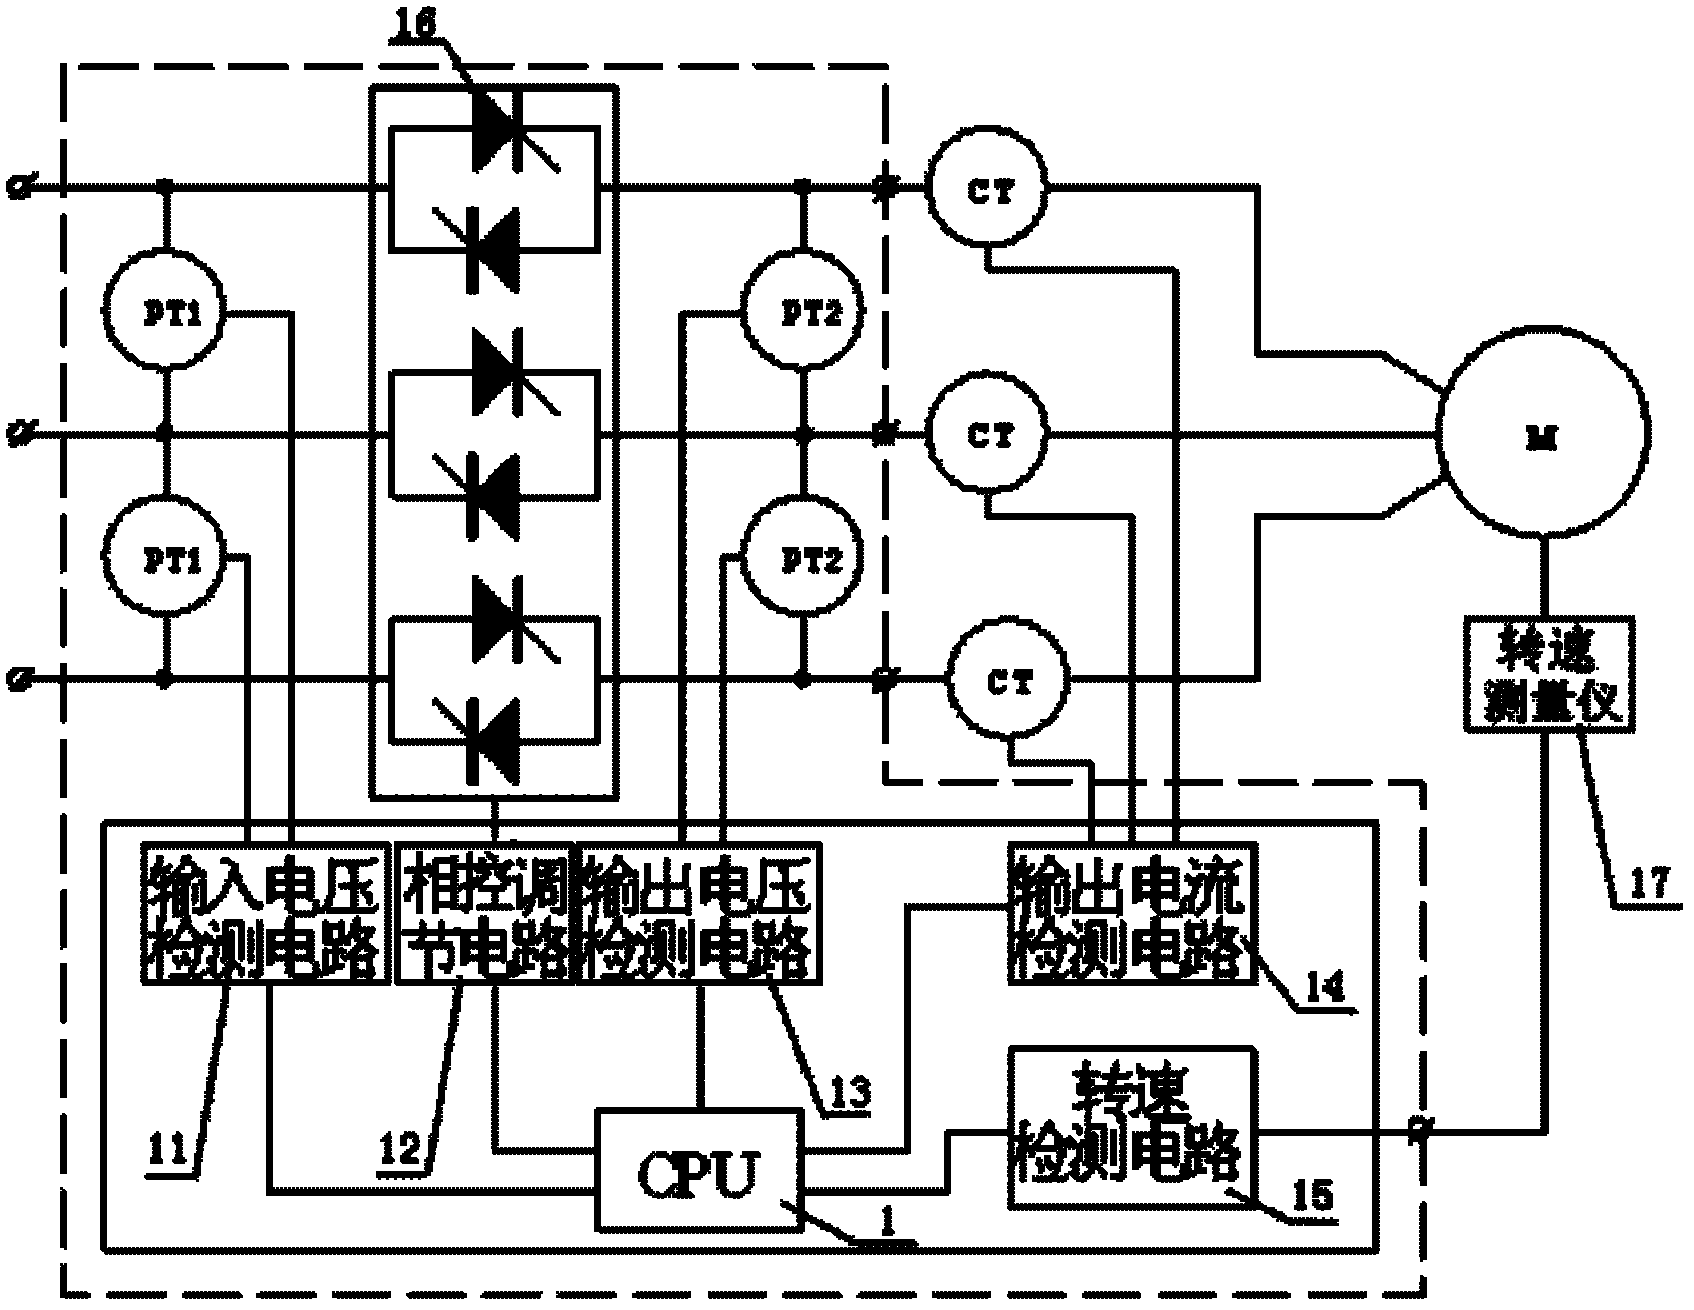 Device for on-line adaptation of motor for automatic operation at optimum efficiency